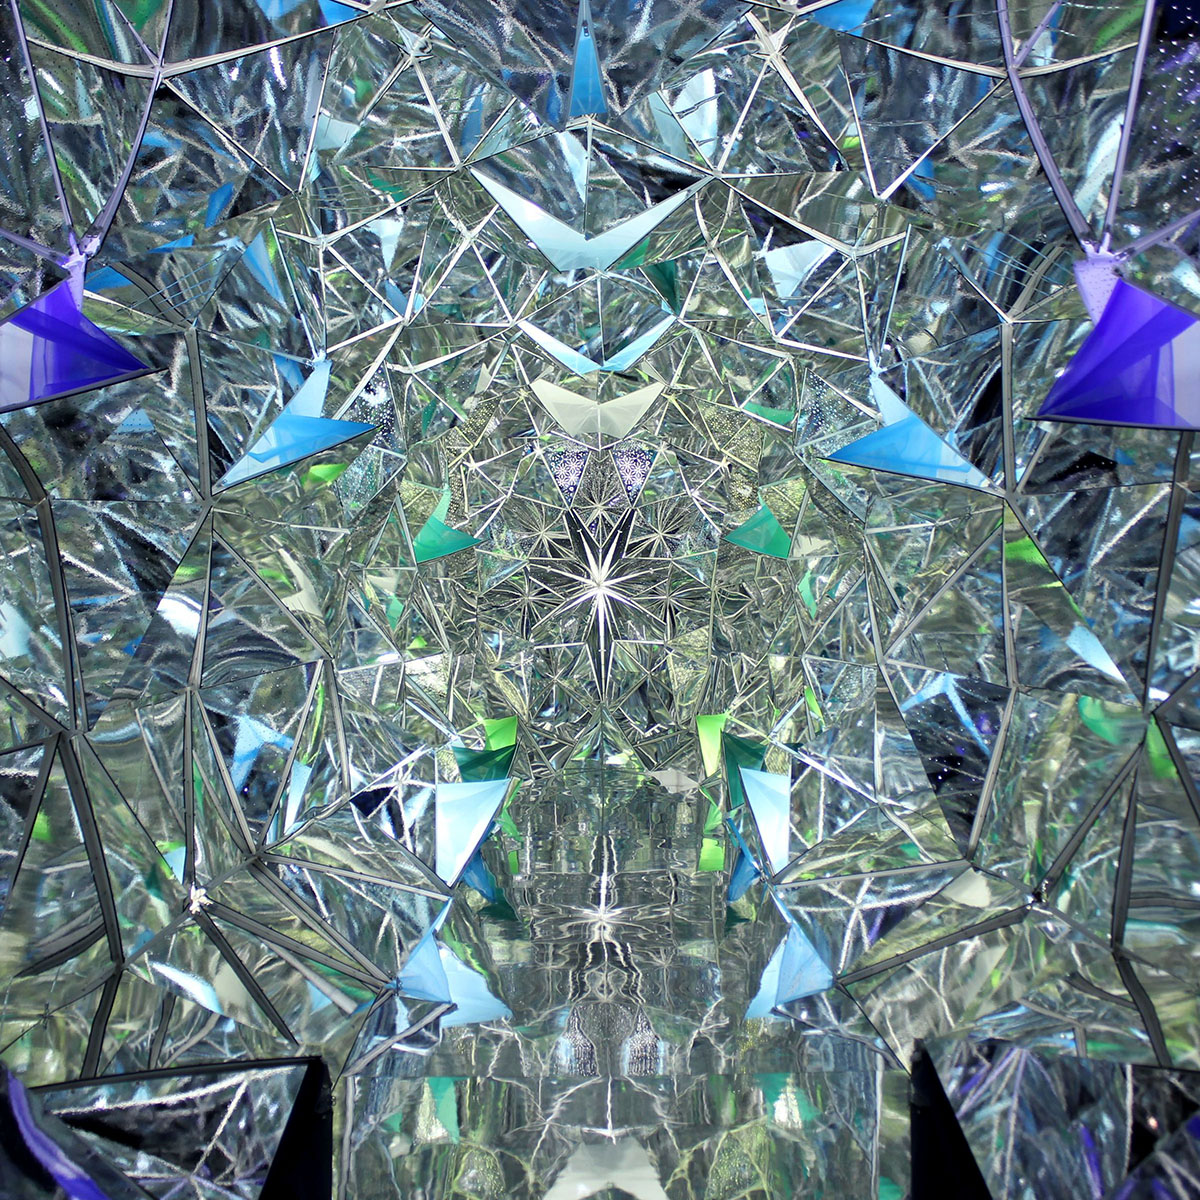 Better than drugs, the kaleidoscopic mirror tunnel